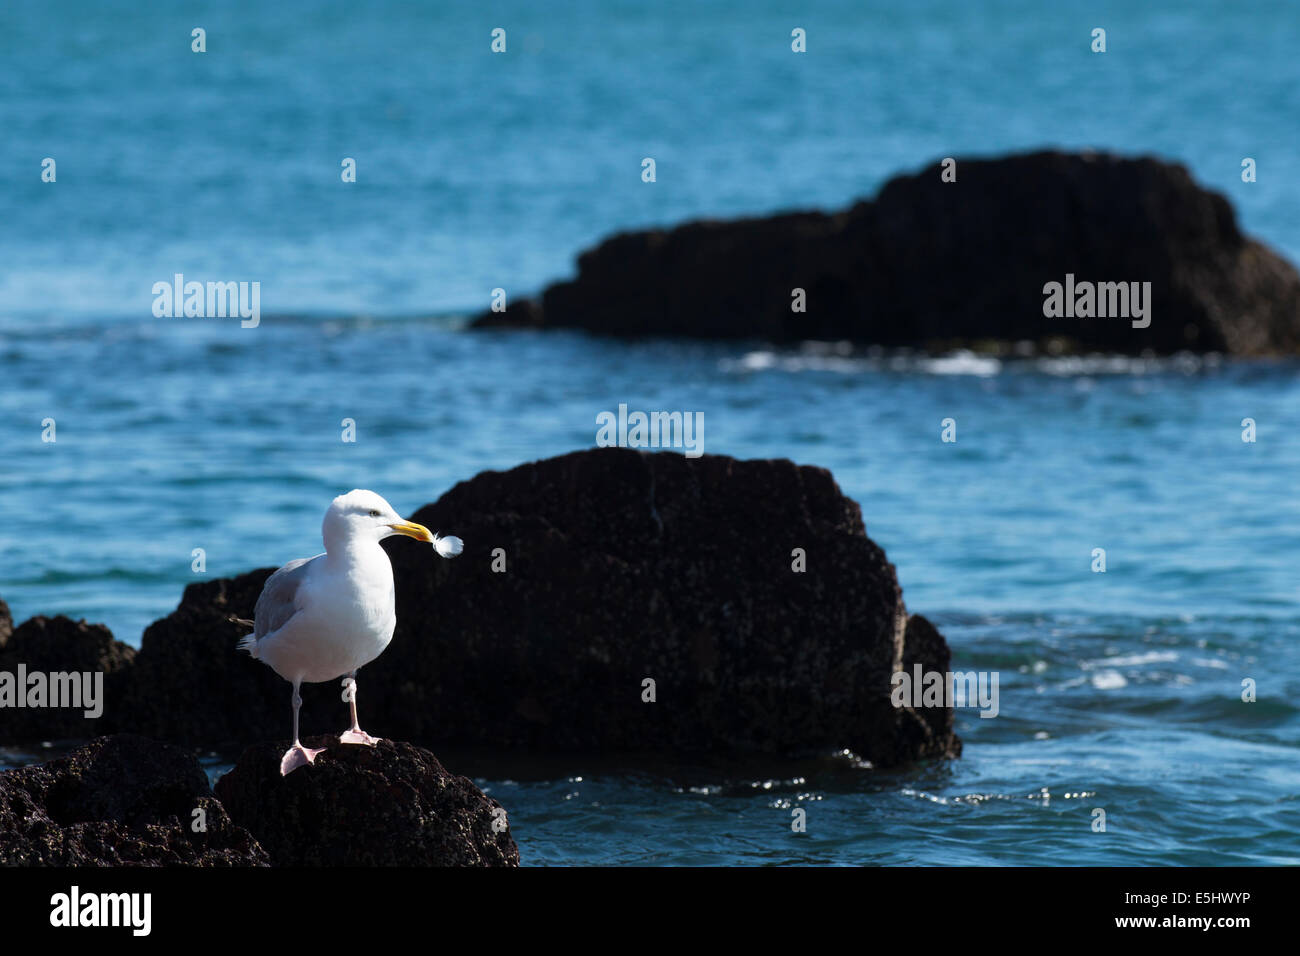 Herring Gull, Larus argentatus, stood on rocks with a feather stuck in its beak Stock Photo